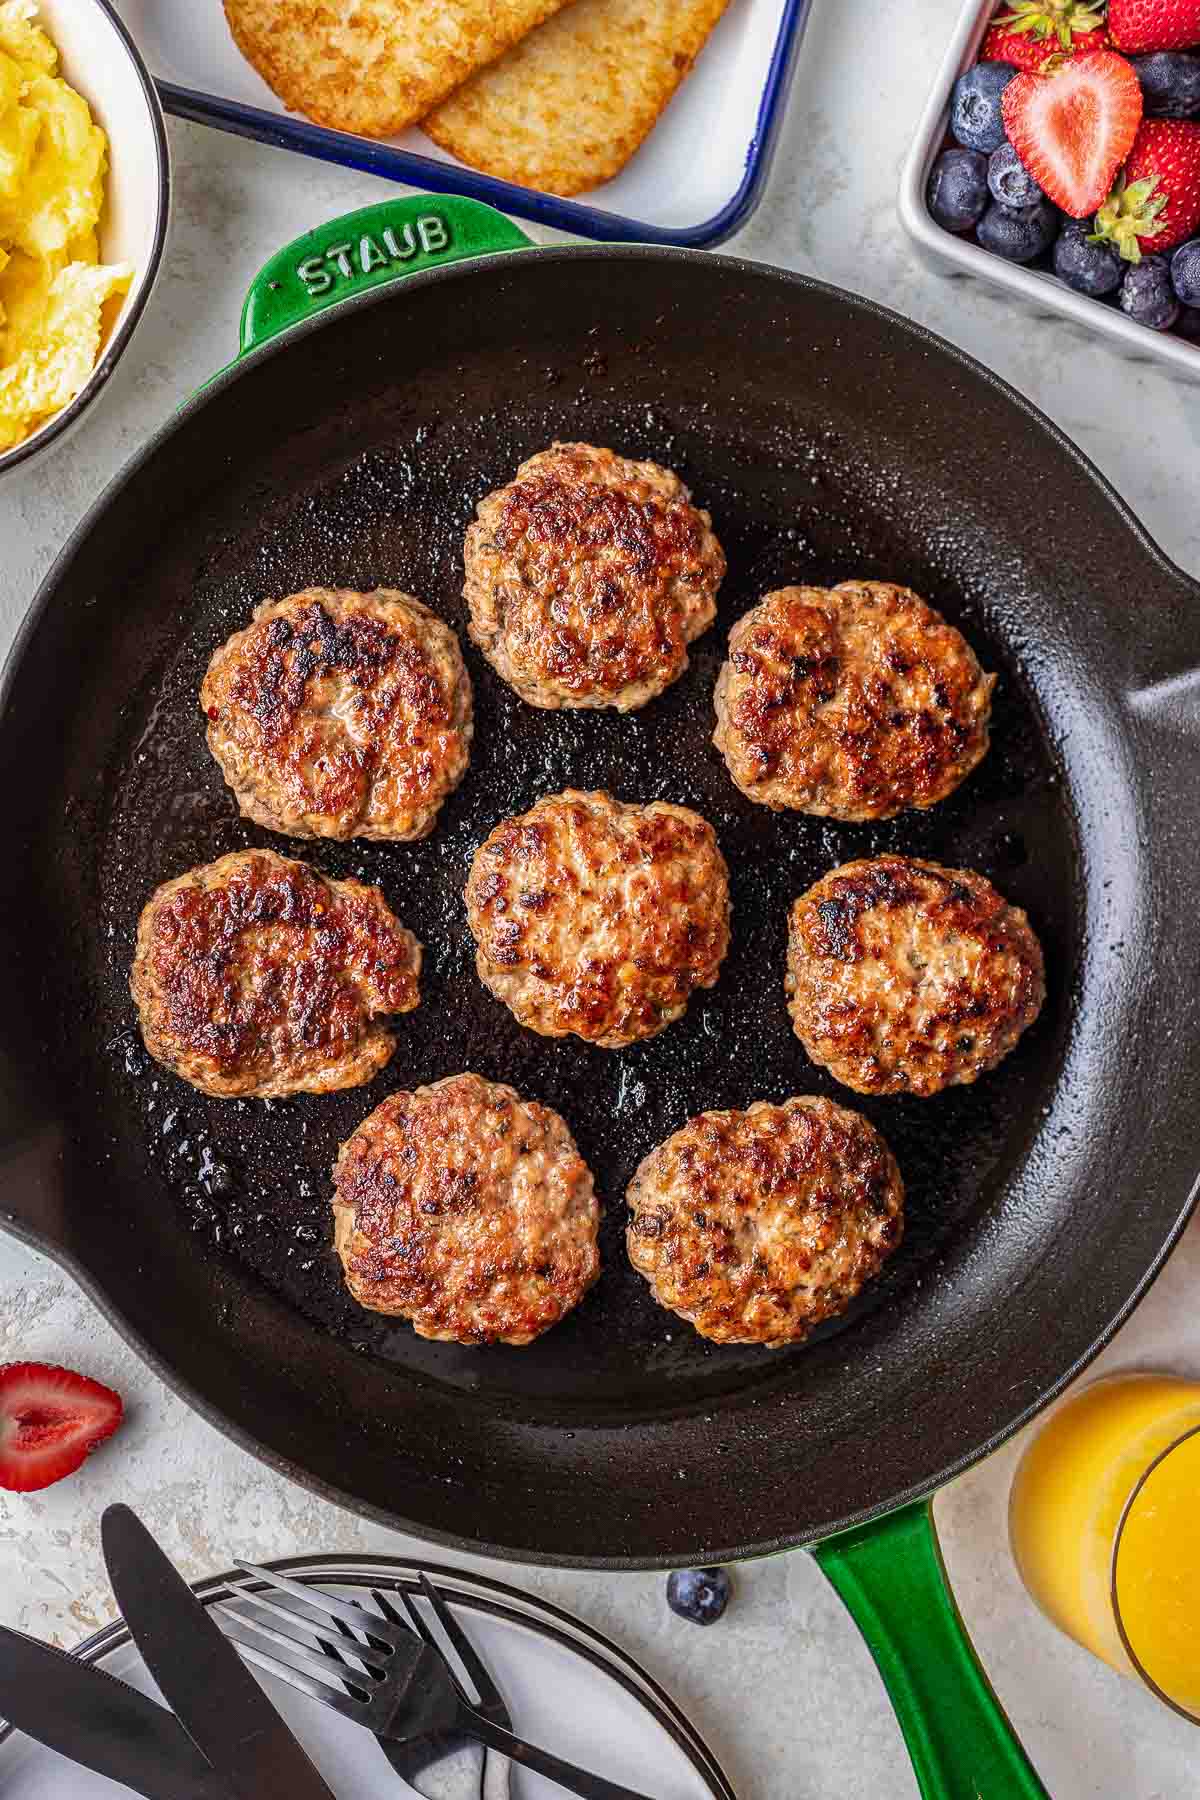 homemade breakfast sausage patties in green skillet with breakfast food close up.